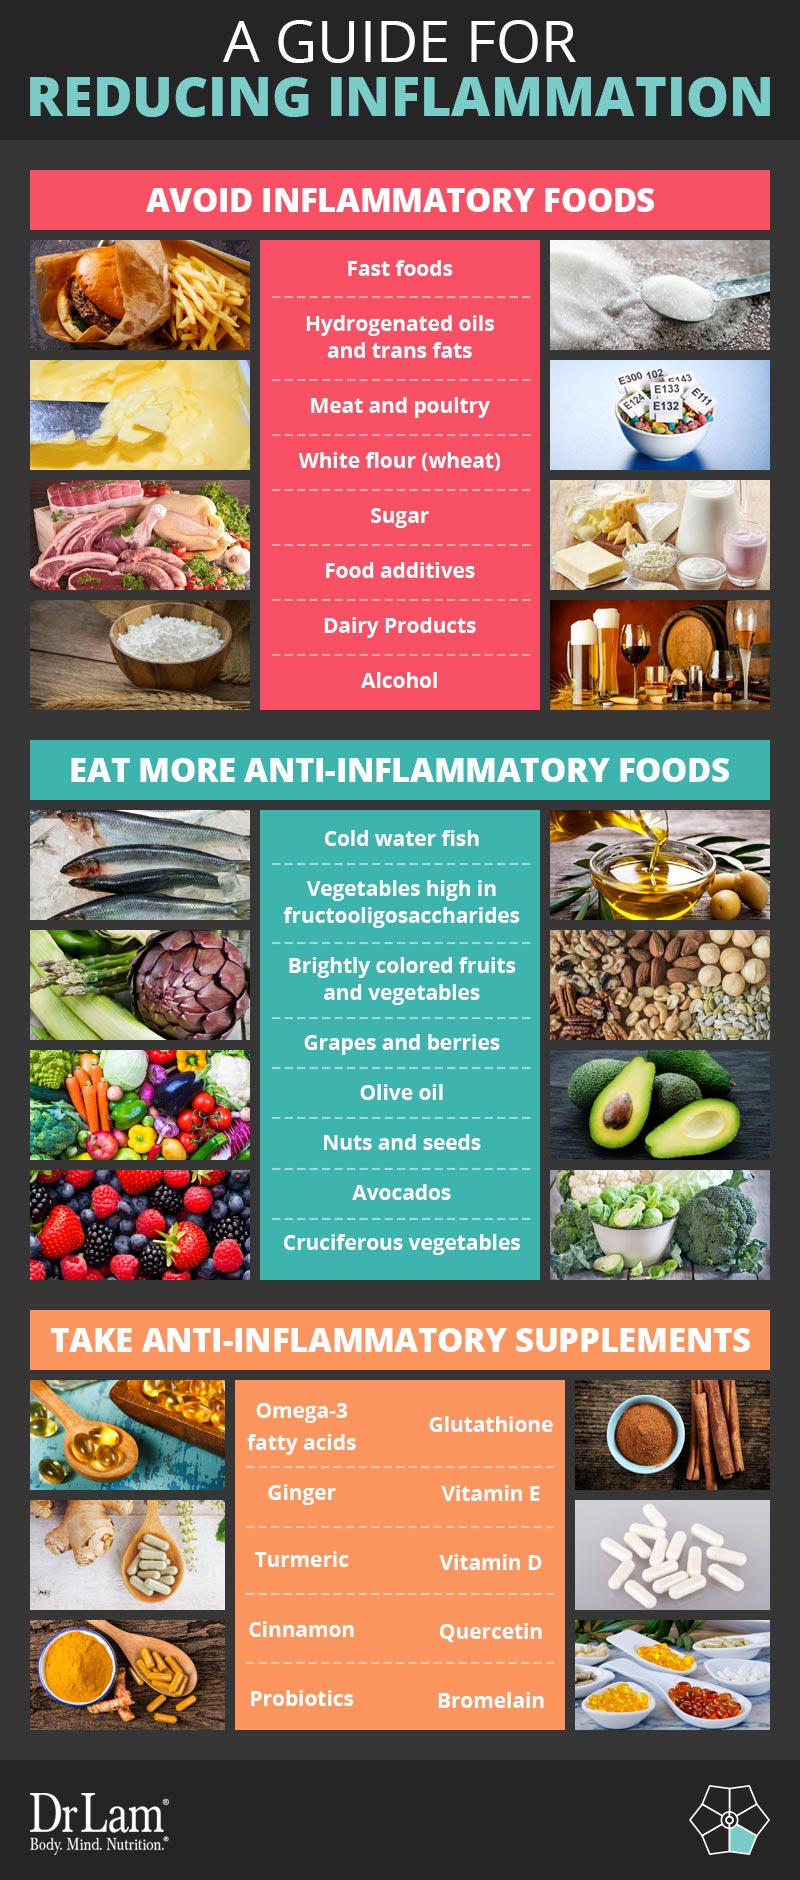 Check out this easy to understand infographic about inflammatory foods, anti-infammatory foods and supplements